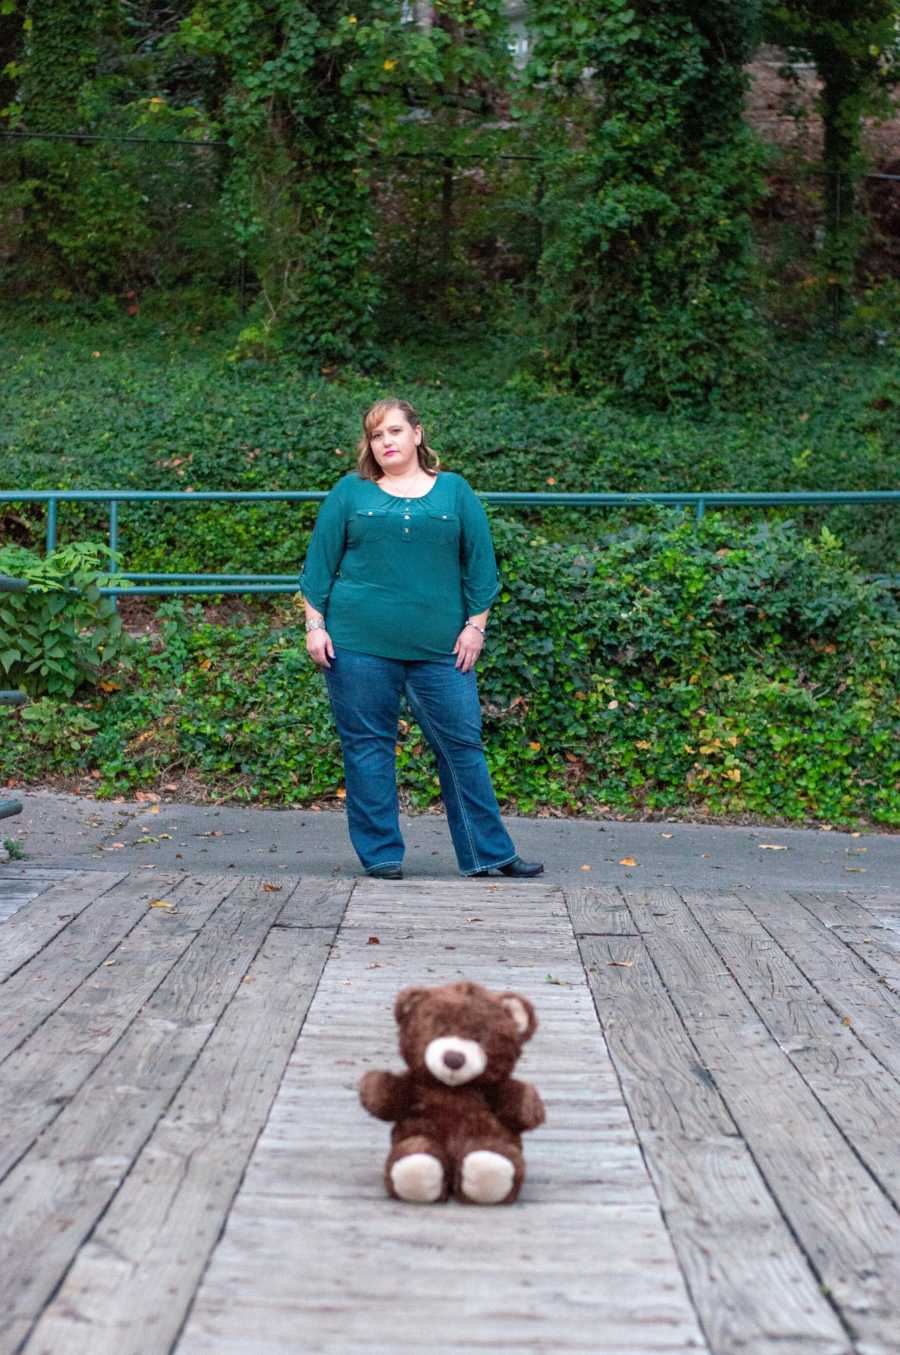 Woman who miscarried stands outside with teddy bear sitting in front of her